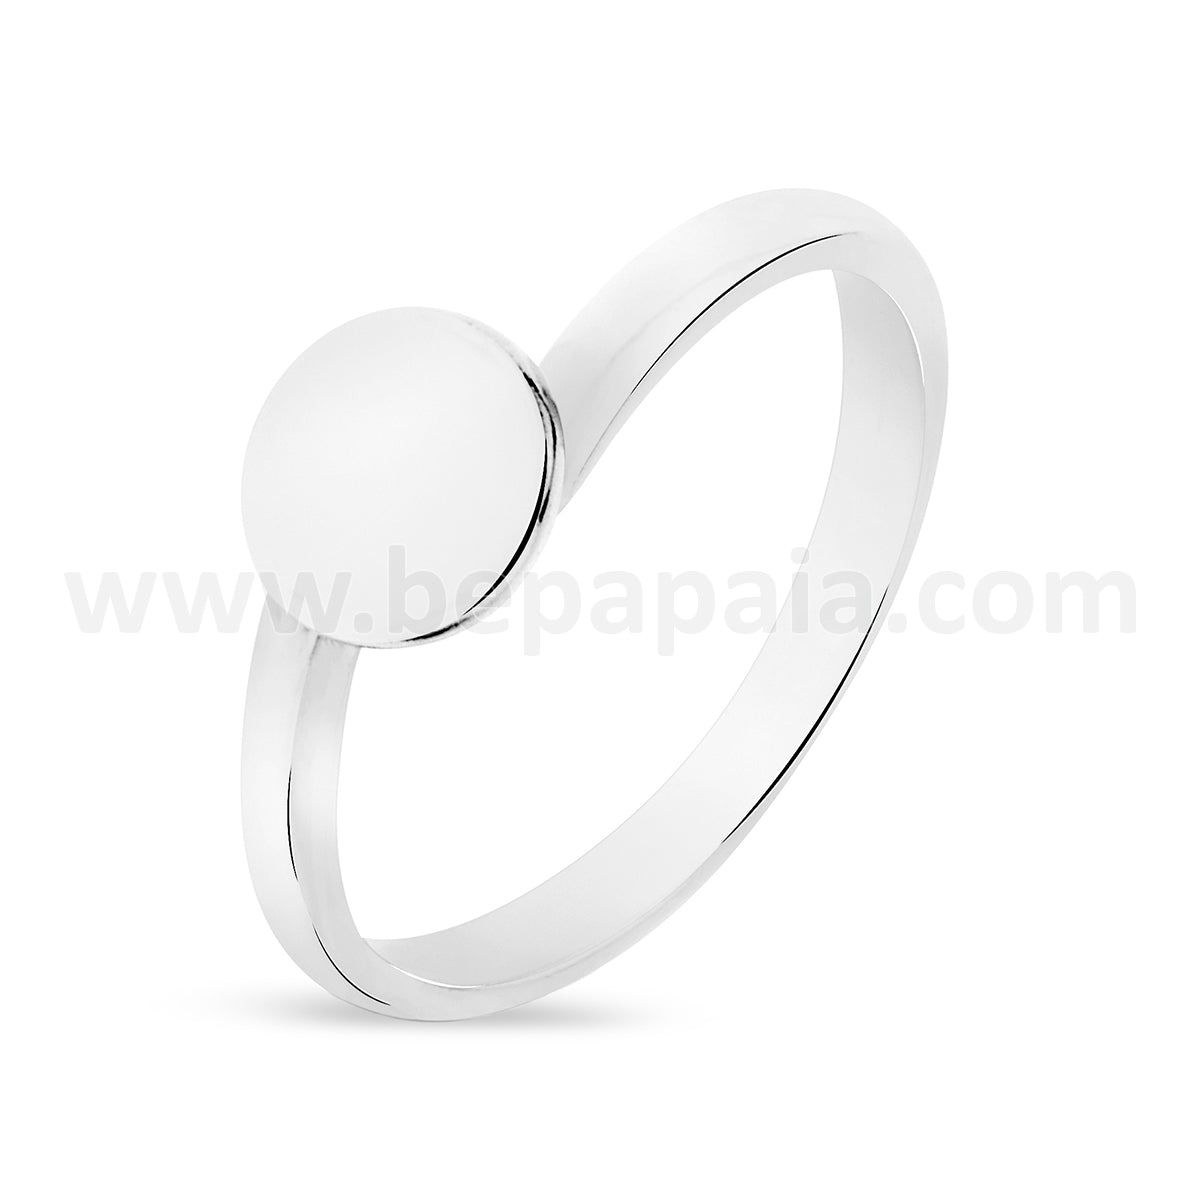 Silver plated midi ring